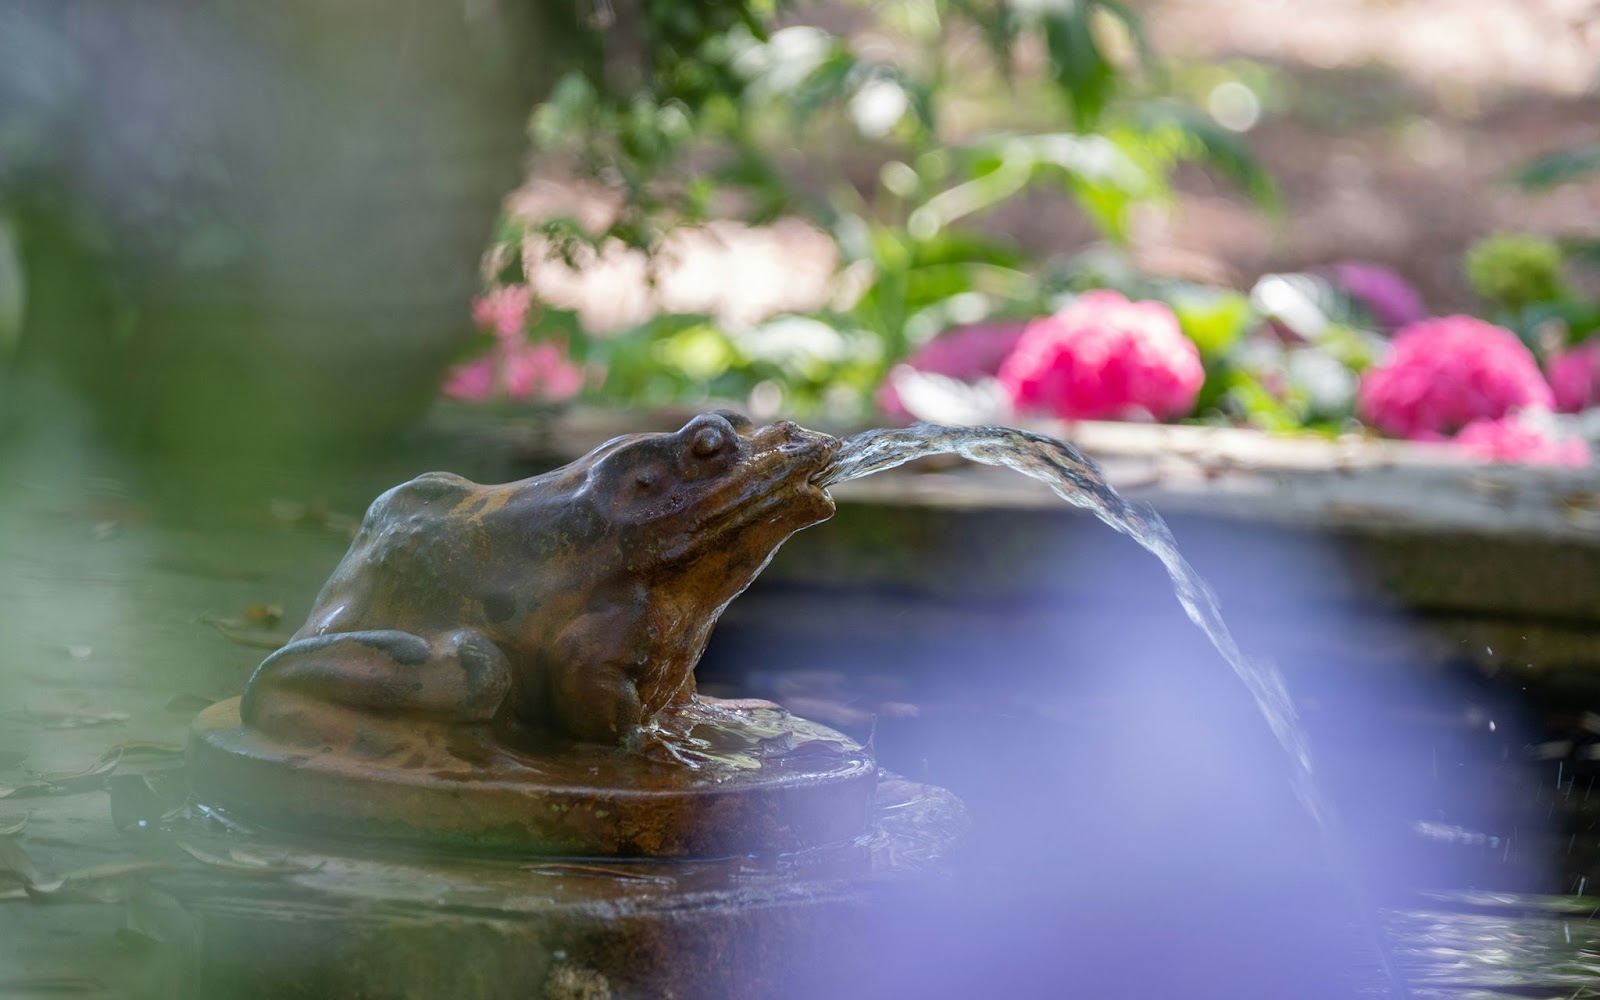 stone frog spouts water into a fountain